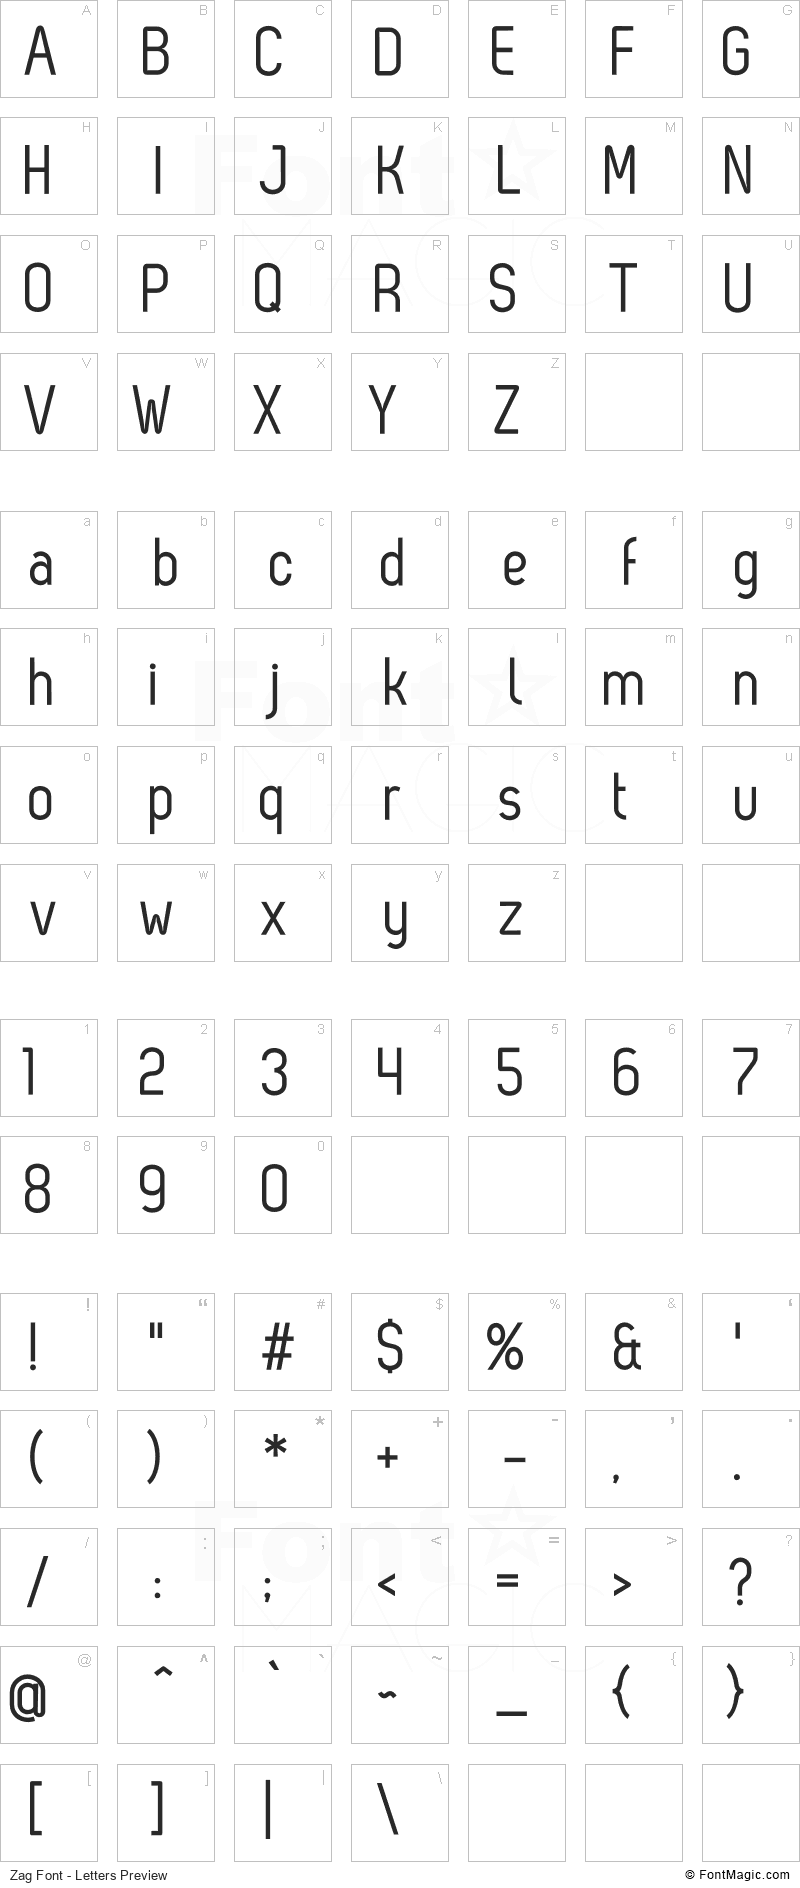 Zag Font - All Latters Preview Chart